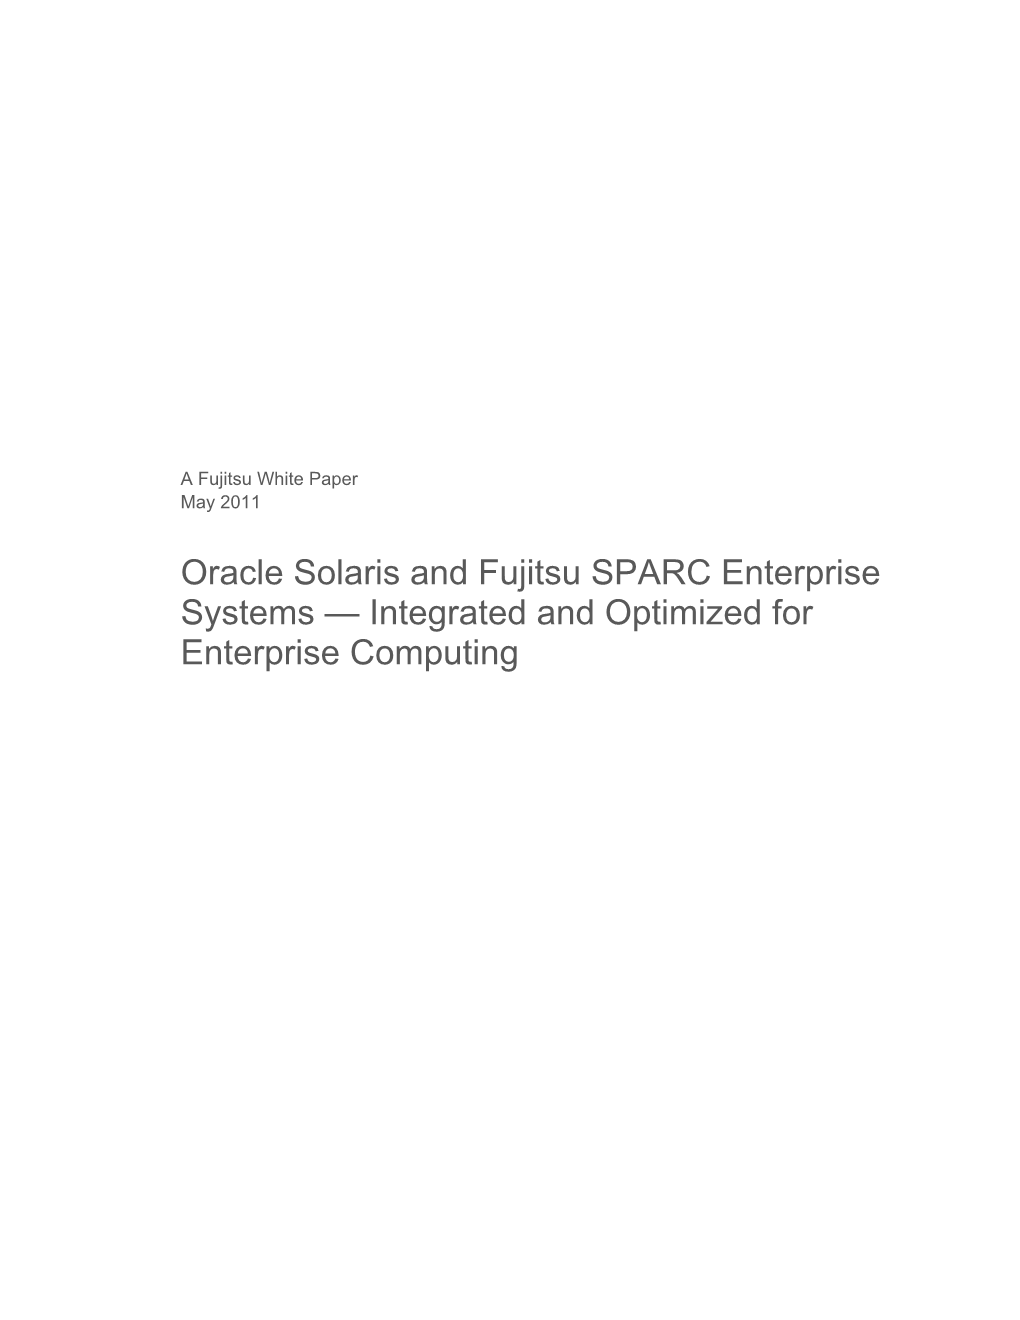 Oracle Solaris and Fujitsu SPARC Enterprise Systems — Integrated and Optimized for Enterprise Computing